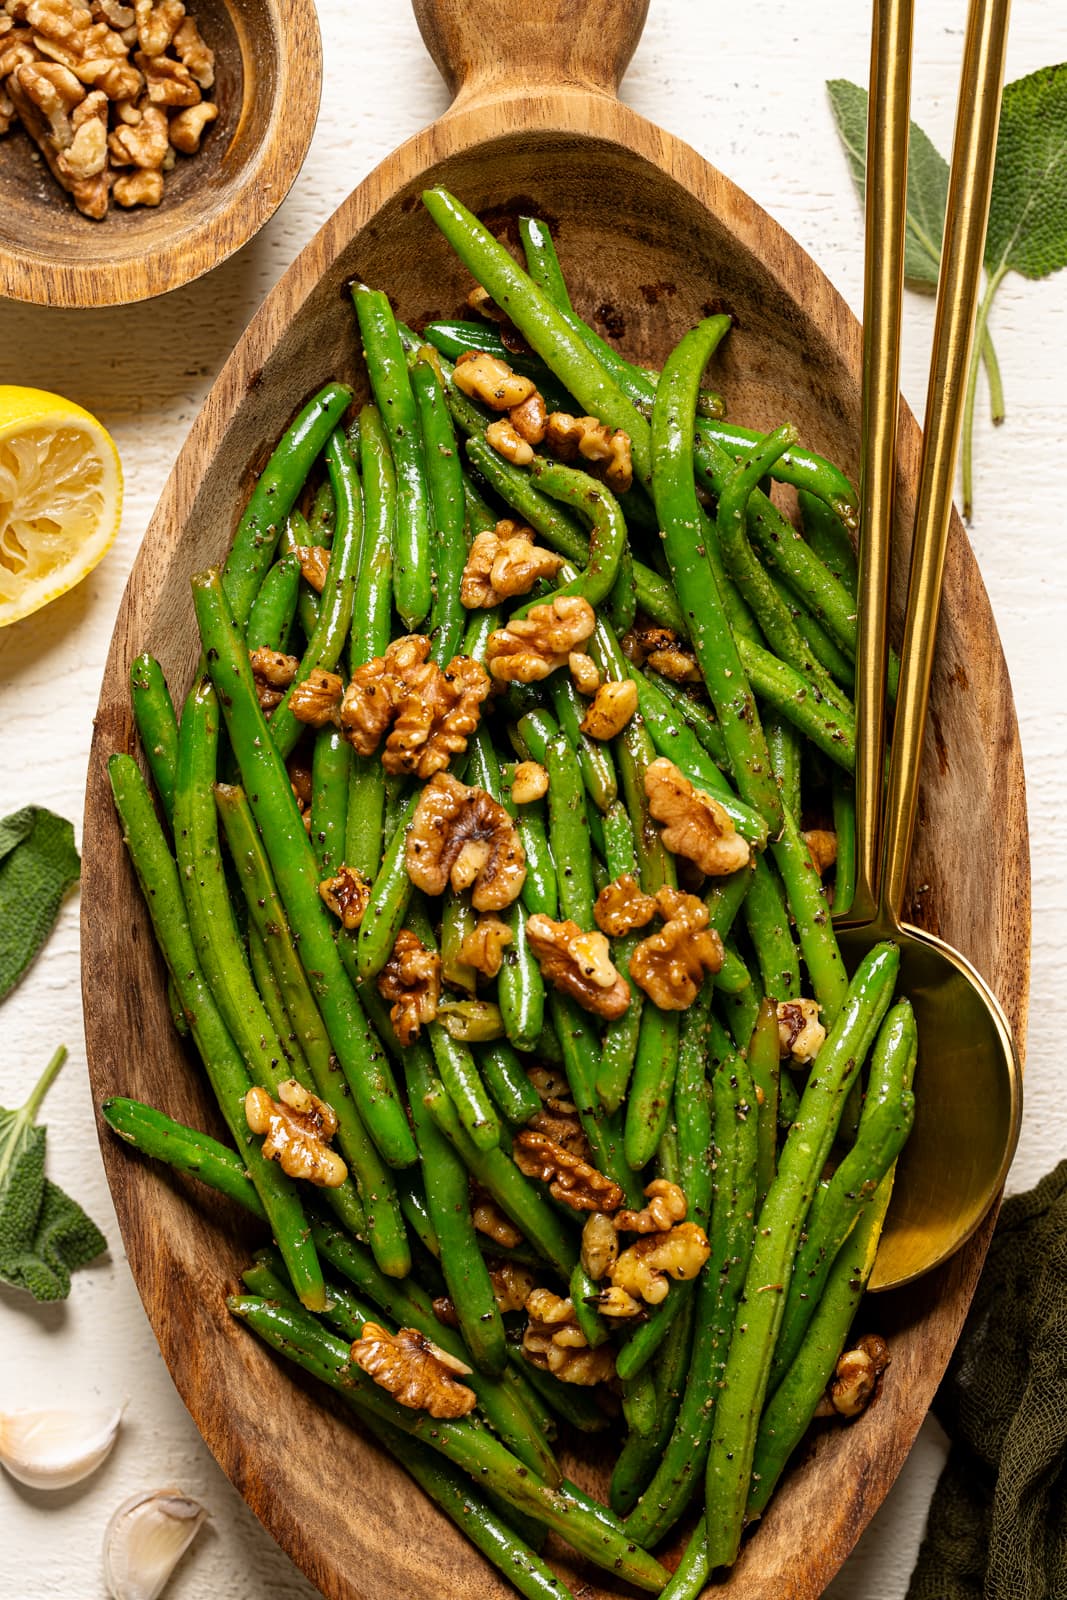 Green beans in a wooden serving platter with two gold spoons.